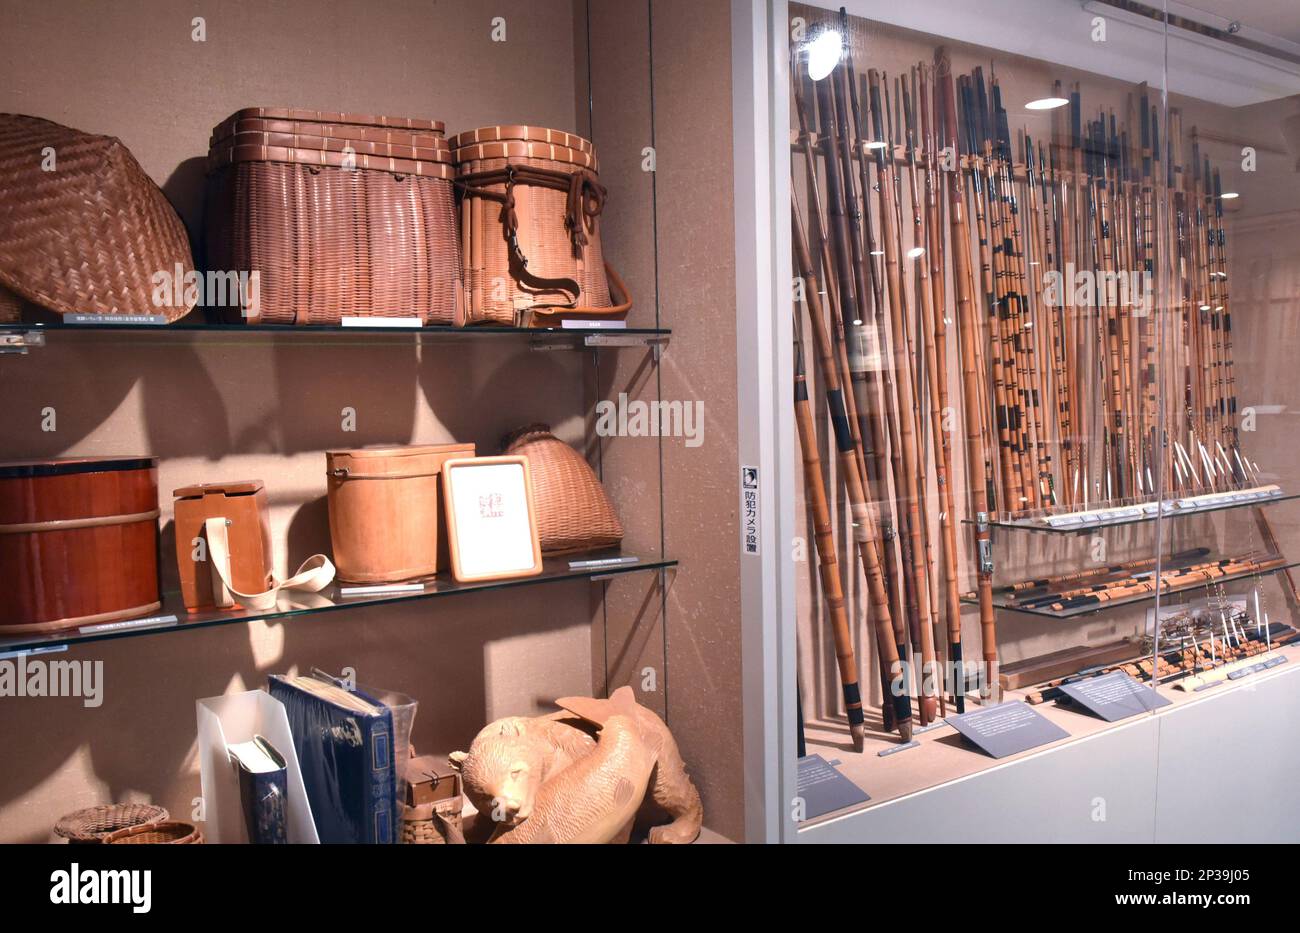 https://c8.alamy.com/comp/2P39J05/fish-poles-and-others-are-displayed-at-tsuri-bunka-shiryokan-literally-fishing-culture-museum-in-shinjuku-tokyo-on-feb-14-2023-the-museum-owns-many-japanese-traditional-fishing-items-such-as-fish-baskets-poles-books-and-others-the-yomiuri-shimbun-via-ap-images-2P39J05.jpg